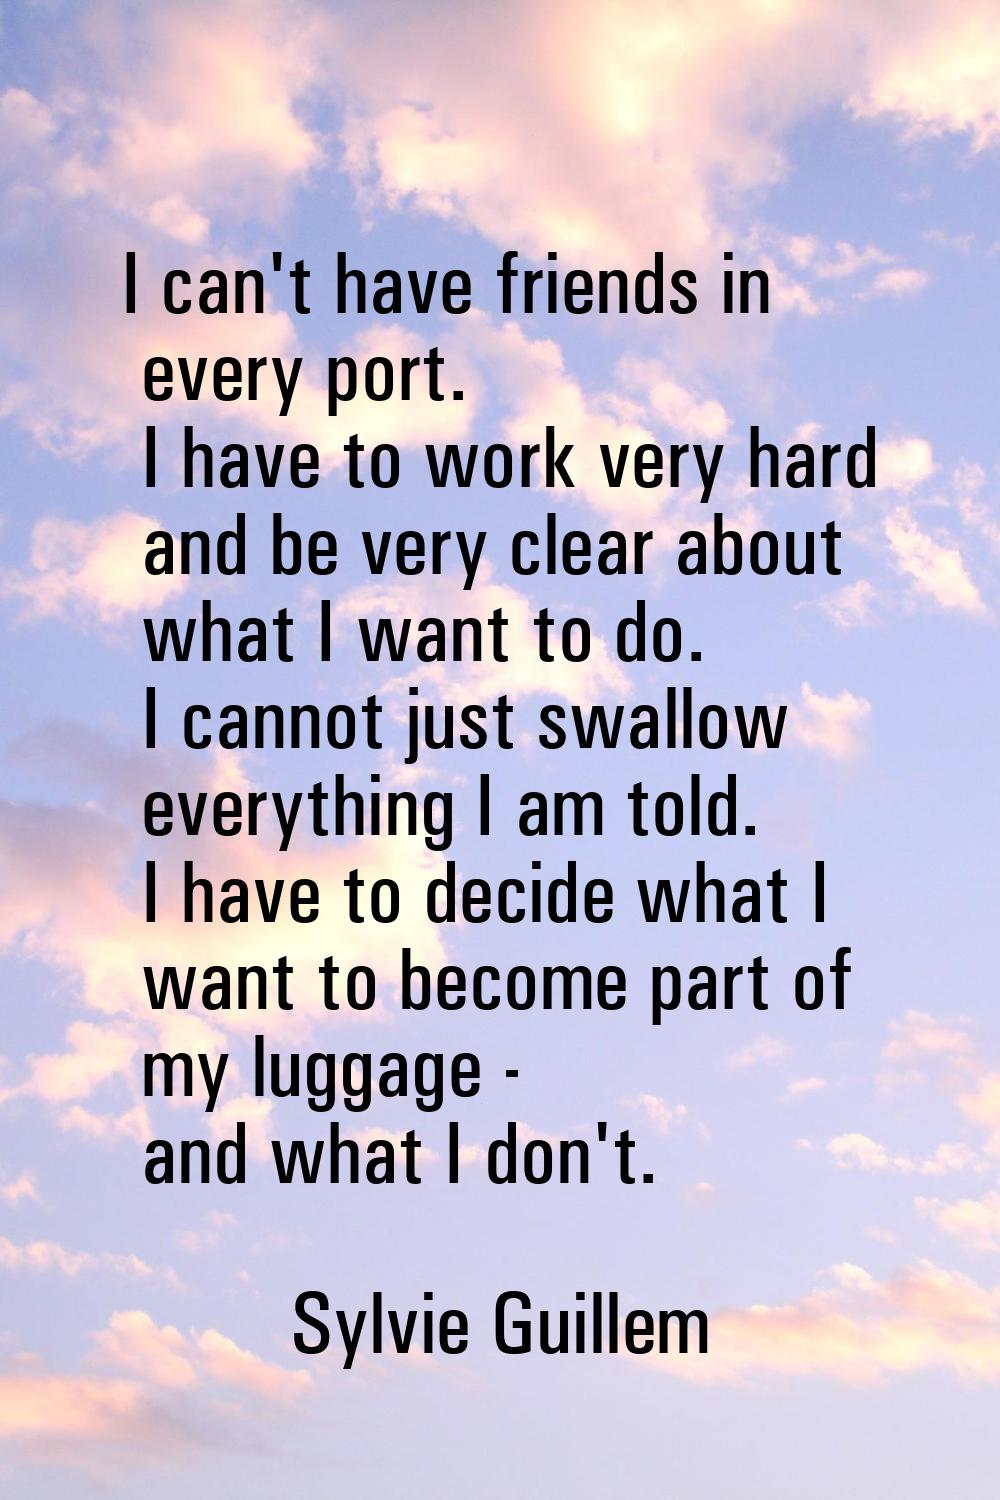 I can't have friends in every port. I have to work very hard and be very clear about what I want to